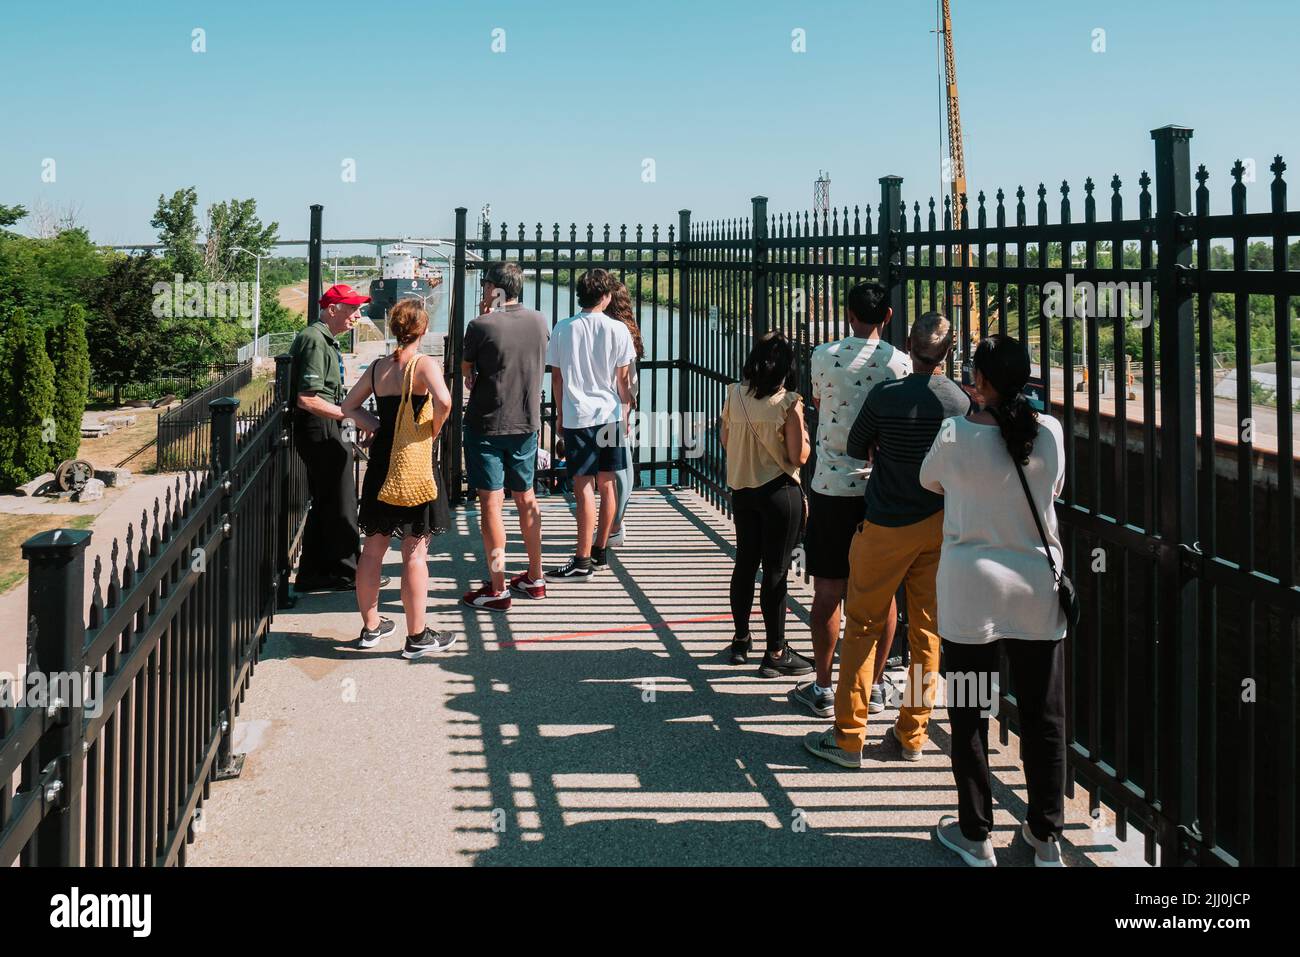 tourists waiting at the wellland canal viewing area for the next cargo ship to arrive Stock Photo